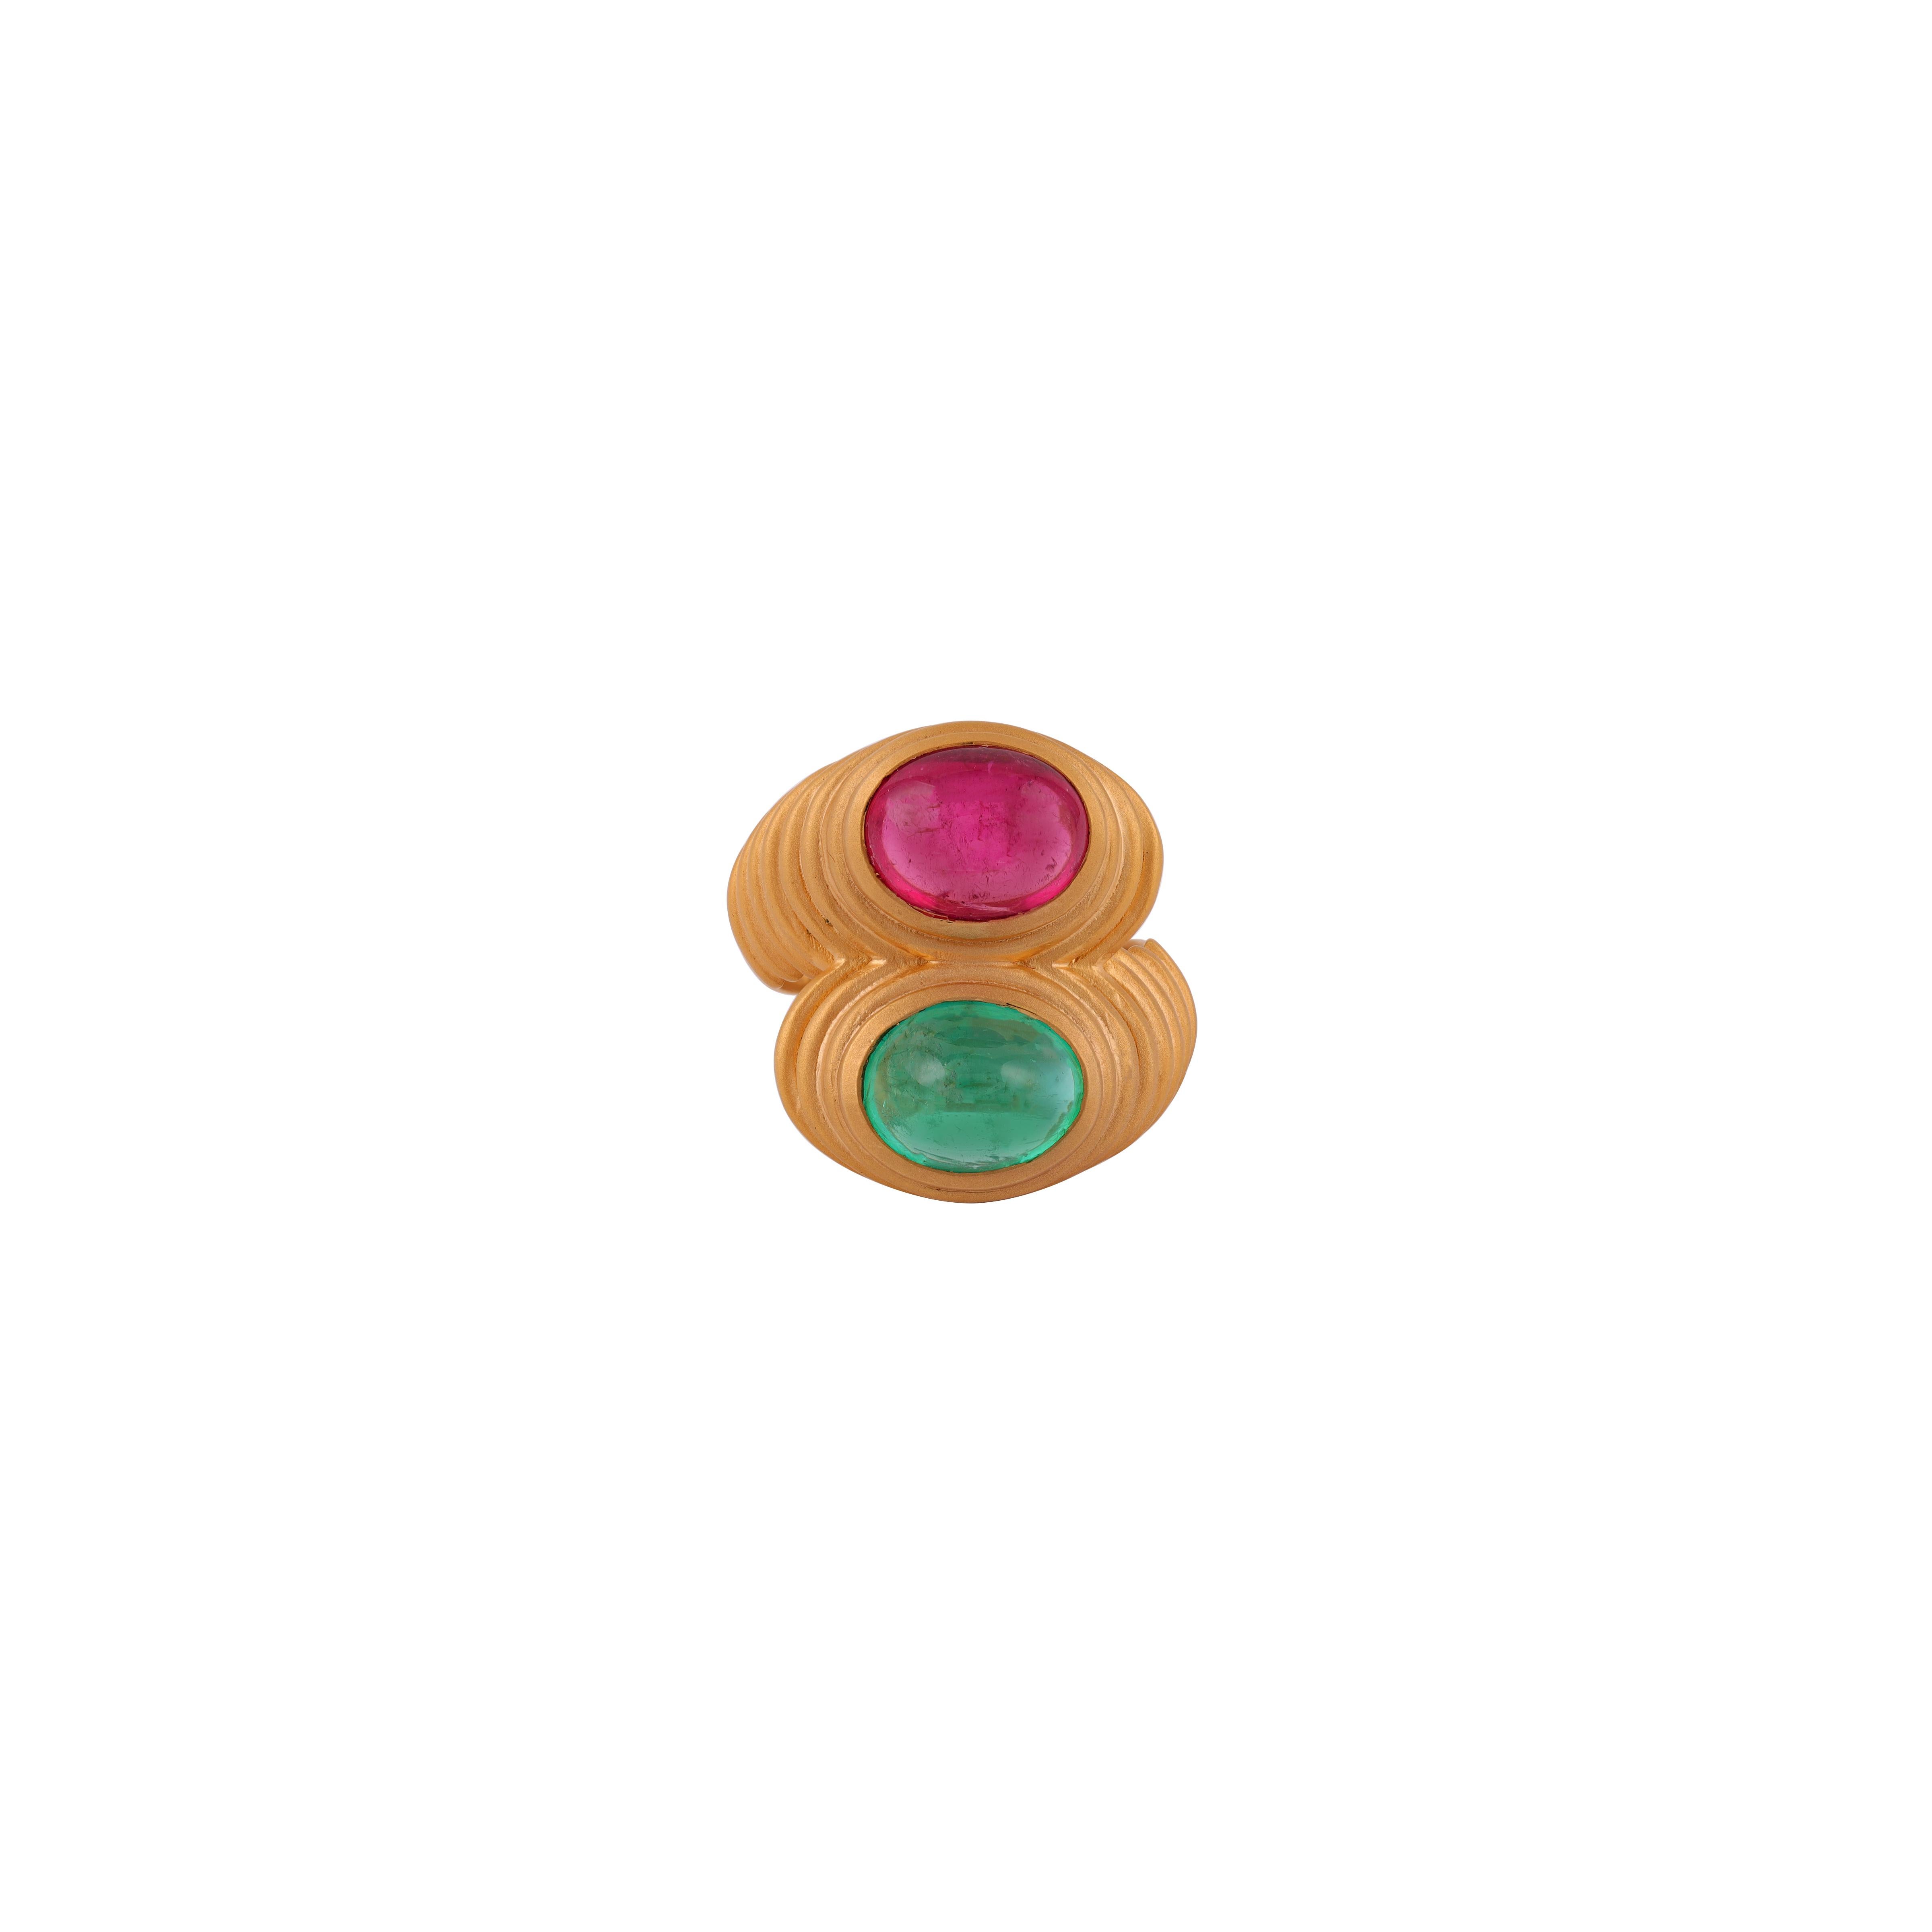 This ring has a mesmerizing Cabochon Cut Emerald weighing 3.02 Carats and Ruby Light weighing 3.07 Carats. 

It is set in 18K  Gold and weighs approximately 11.39 grams.

The ring size is 7  and can be re-sized at no additional charge.